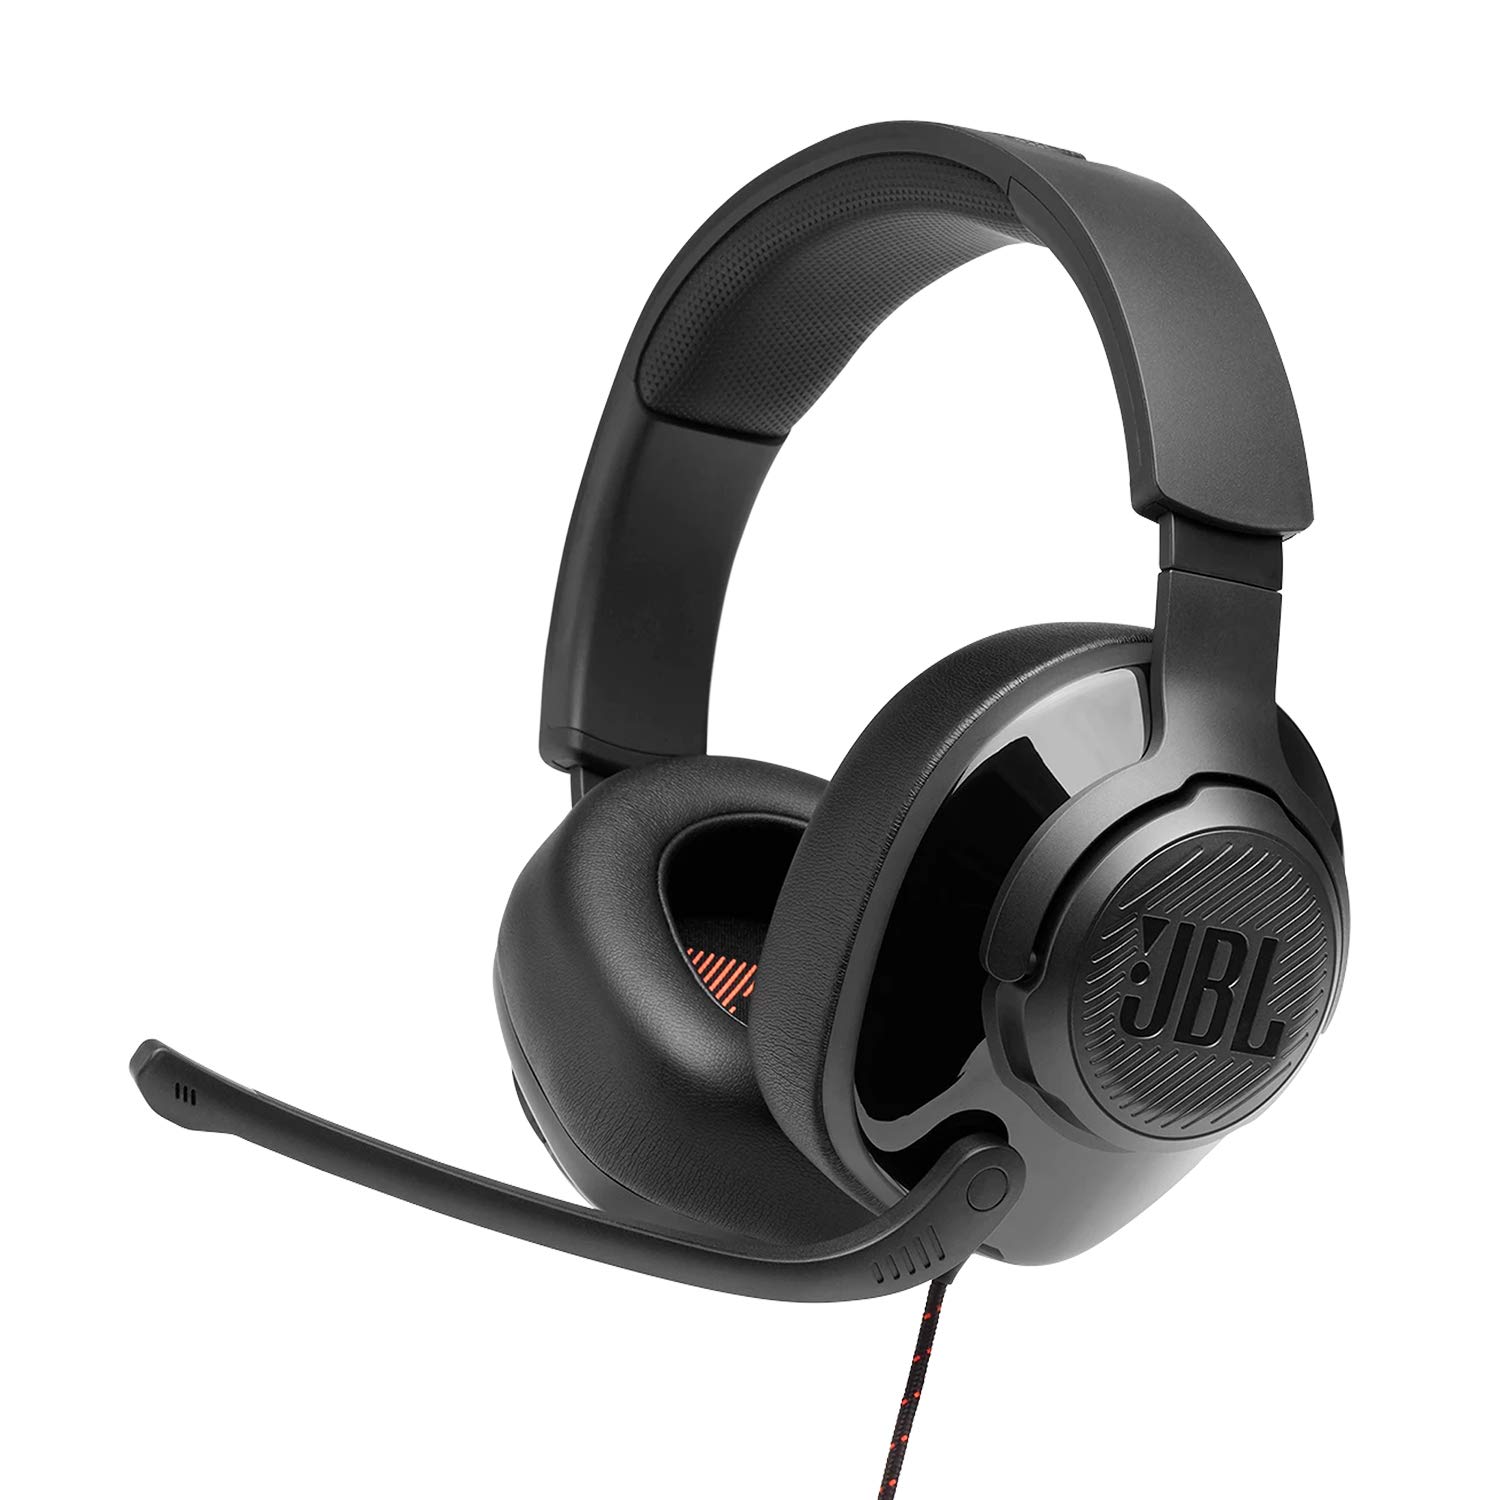 JBL Quantum 300, Wired Over Ear Gaming Headphone with Mic, JBL Quantum Surround Sound, 3.5mm to USB Type-A Adapter, PC, Mobile, Laptop, PS4, Xbox & VR Compatible (Black)